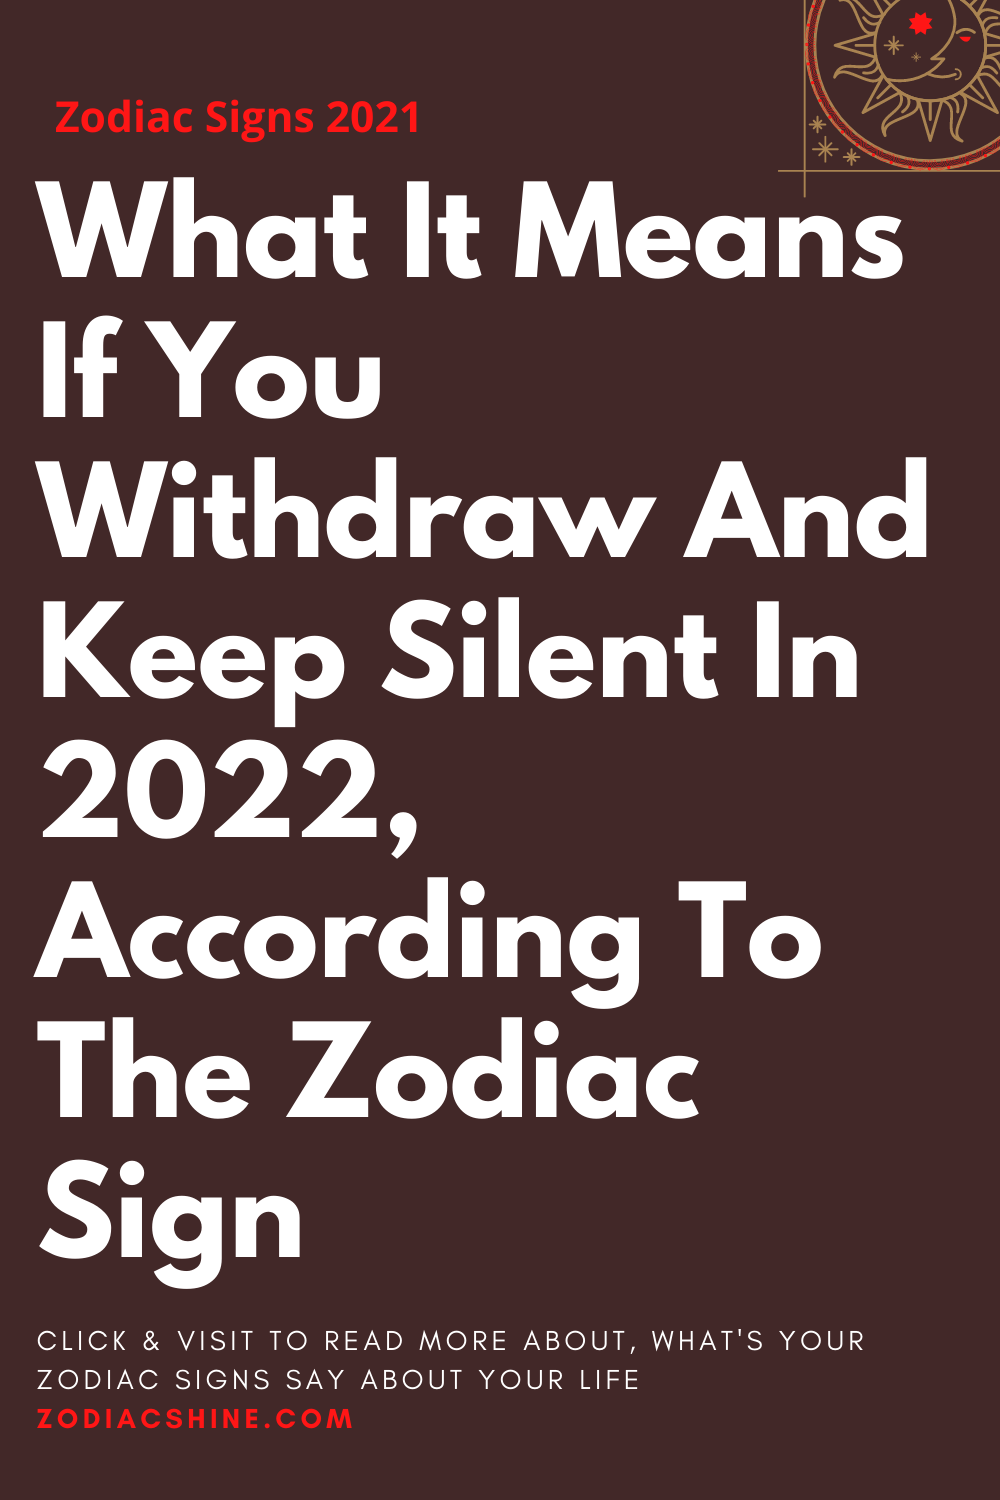 What It Means If You Withdraw And Keep Silent In 2022 According To The Zodiac Sign